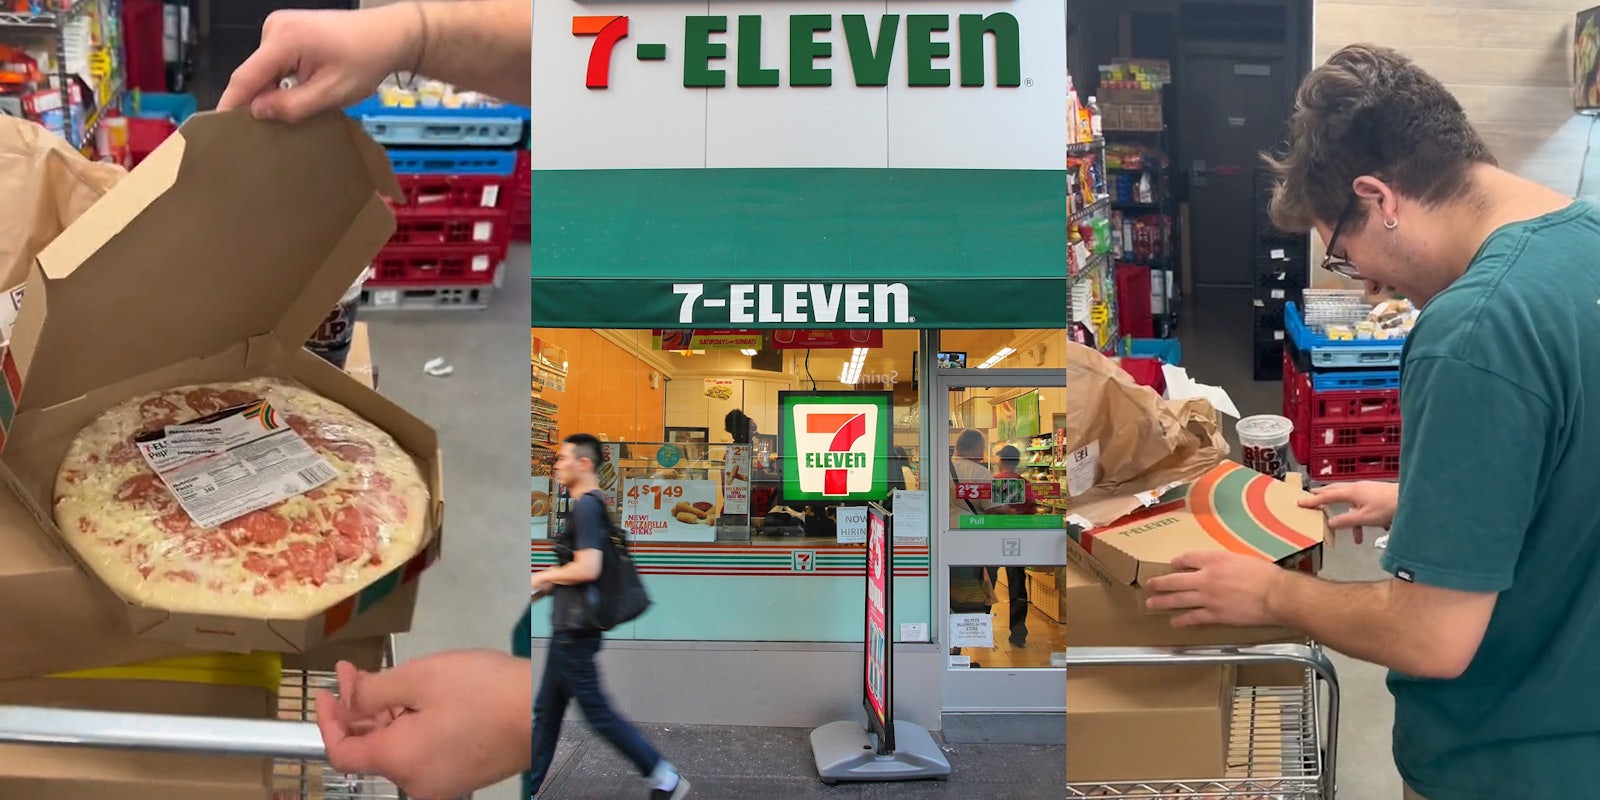 worker putting 7-11 frozen pizza in box (l) 7-11 building with signs (c) worker closing 7-11 pizza box (r)